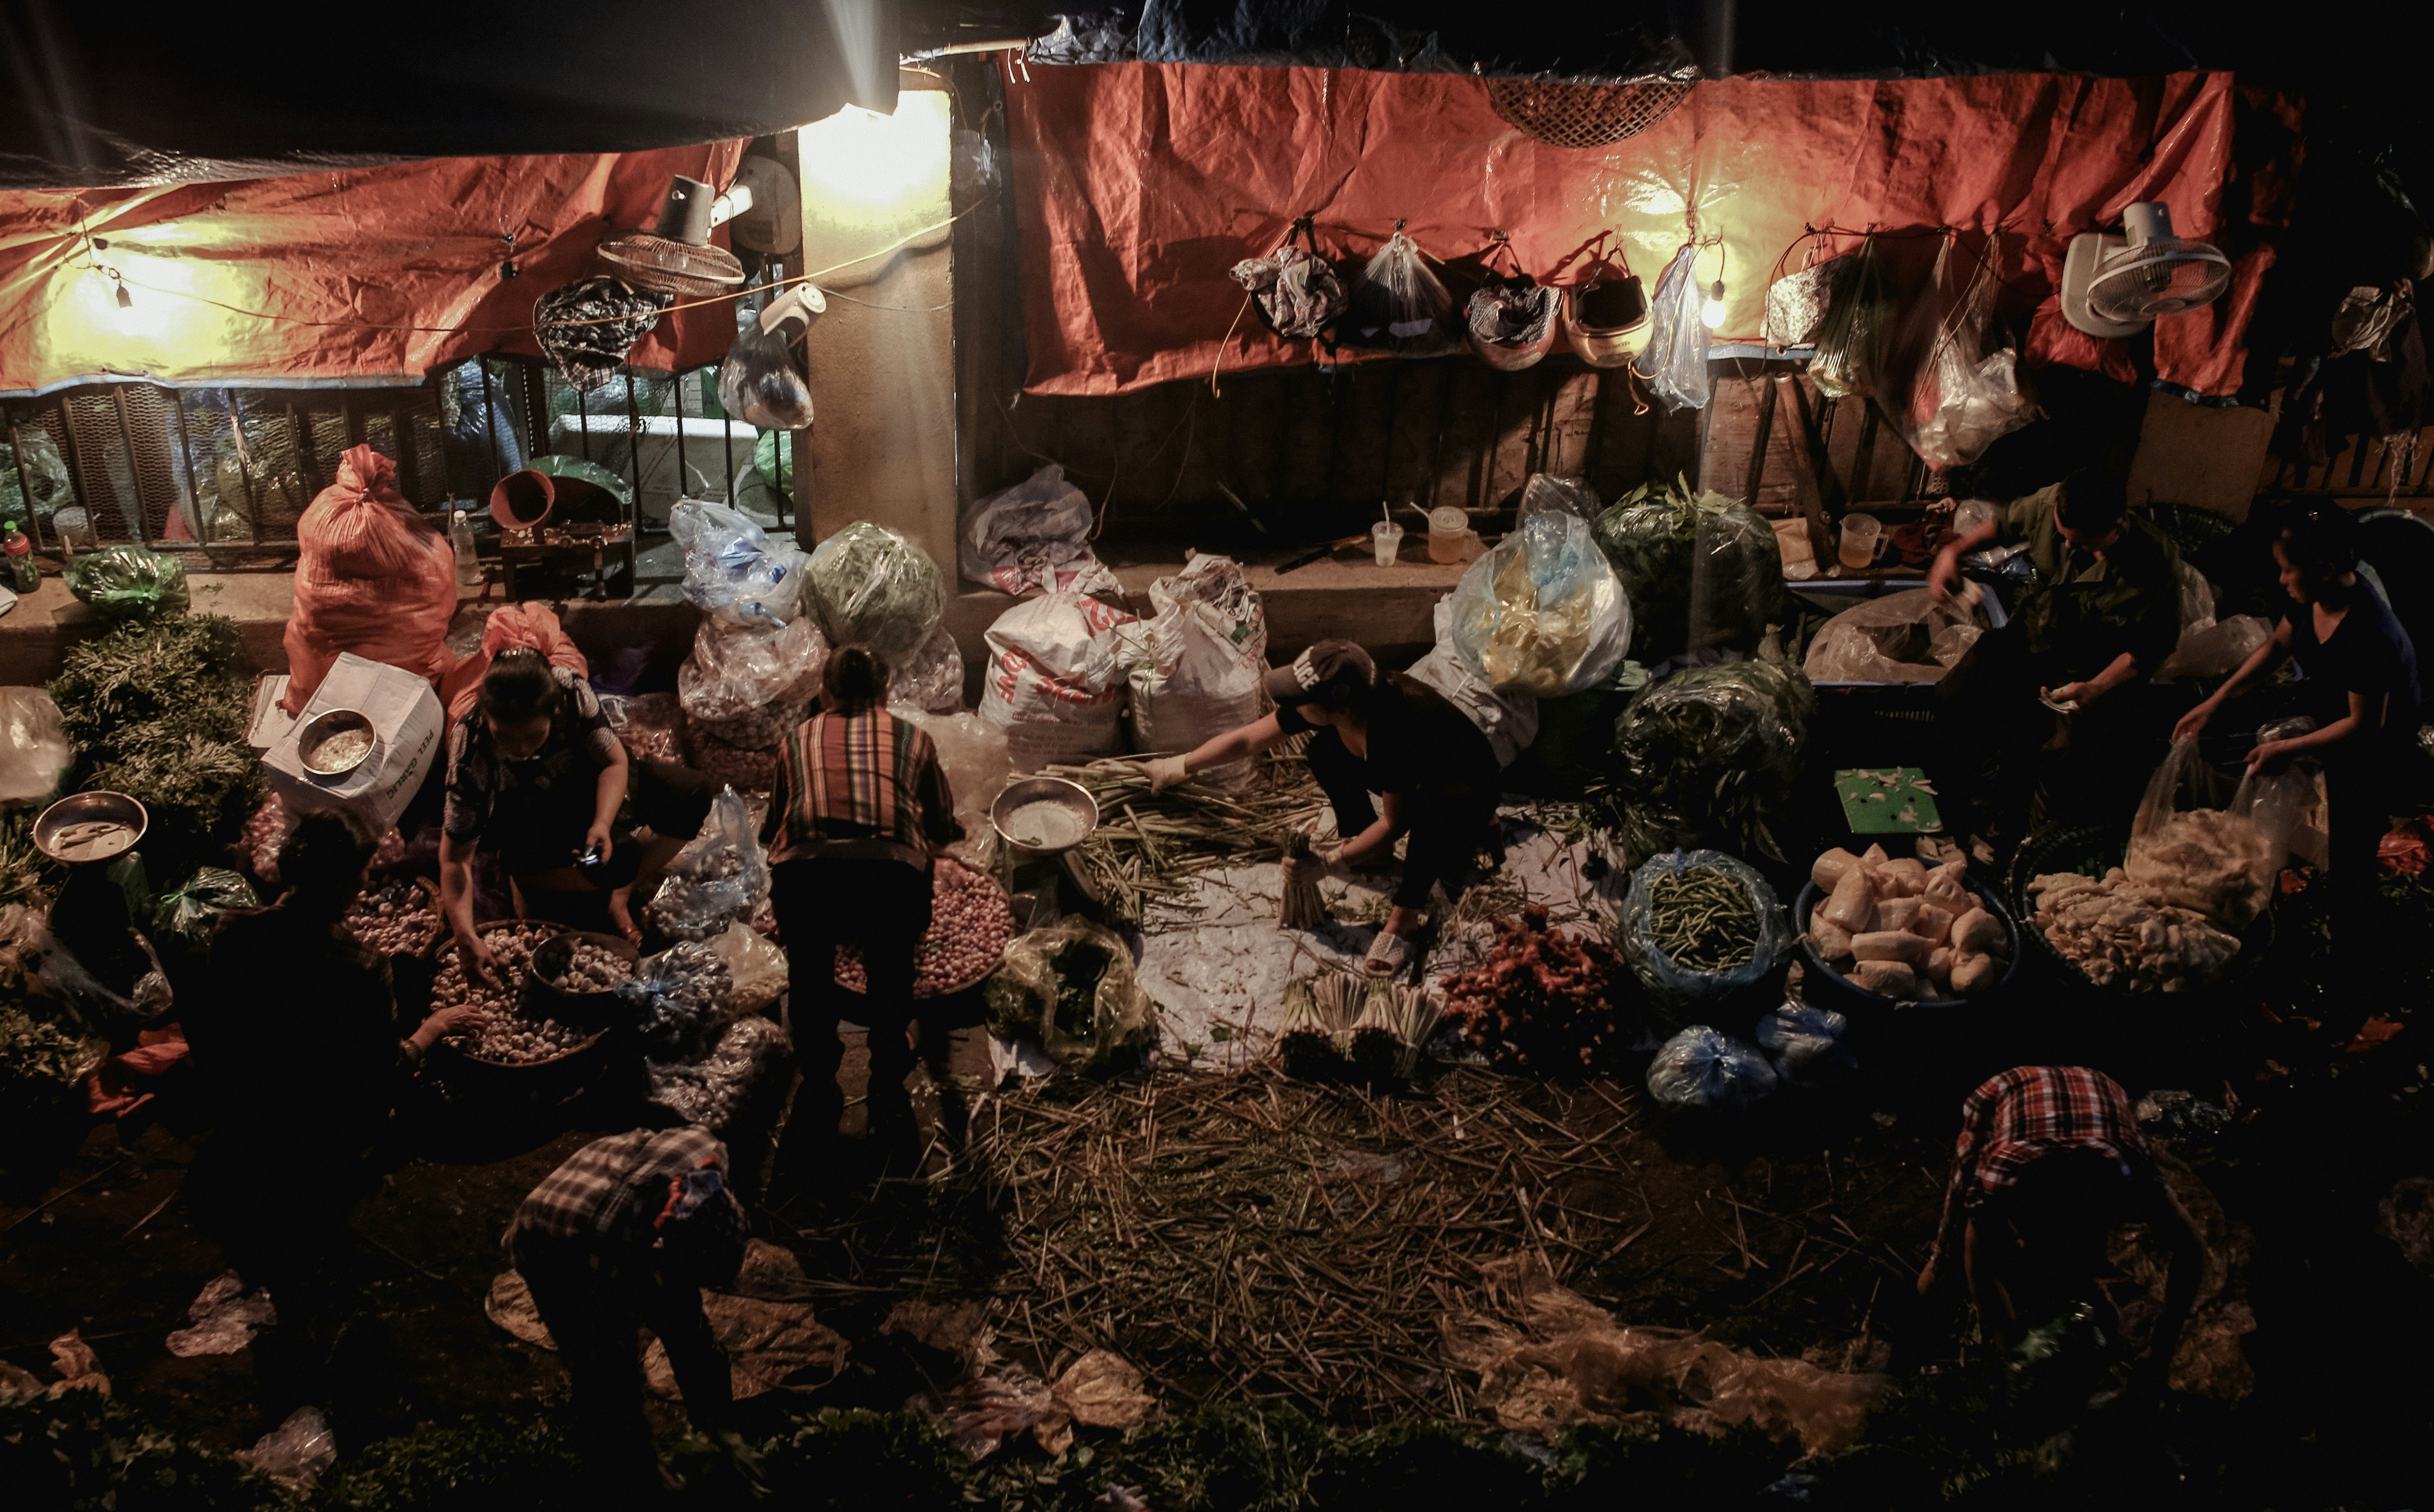 The market located at the Northern side of Hanoi’s Old Quarter takes the graveyard shift getting fully underway by about 1 am and by 6 am things are settling down and winding to a finish.